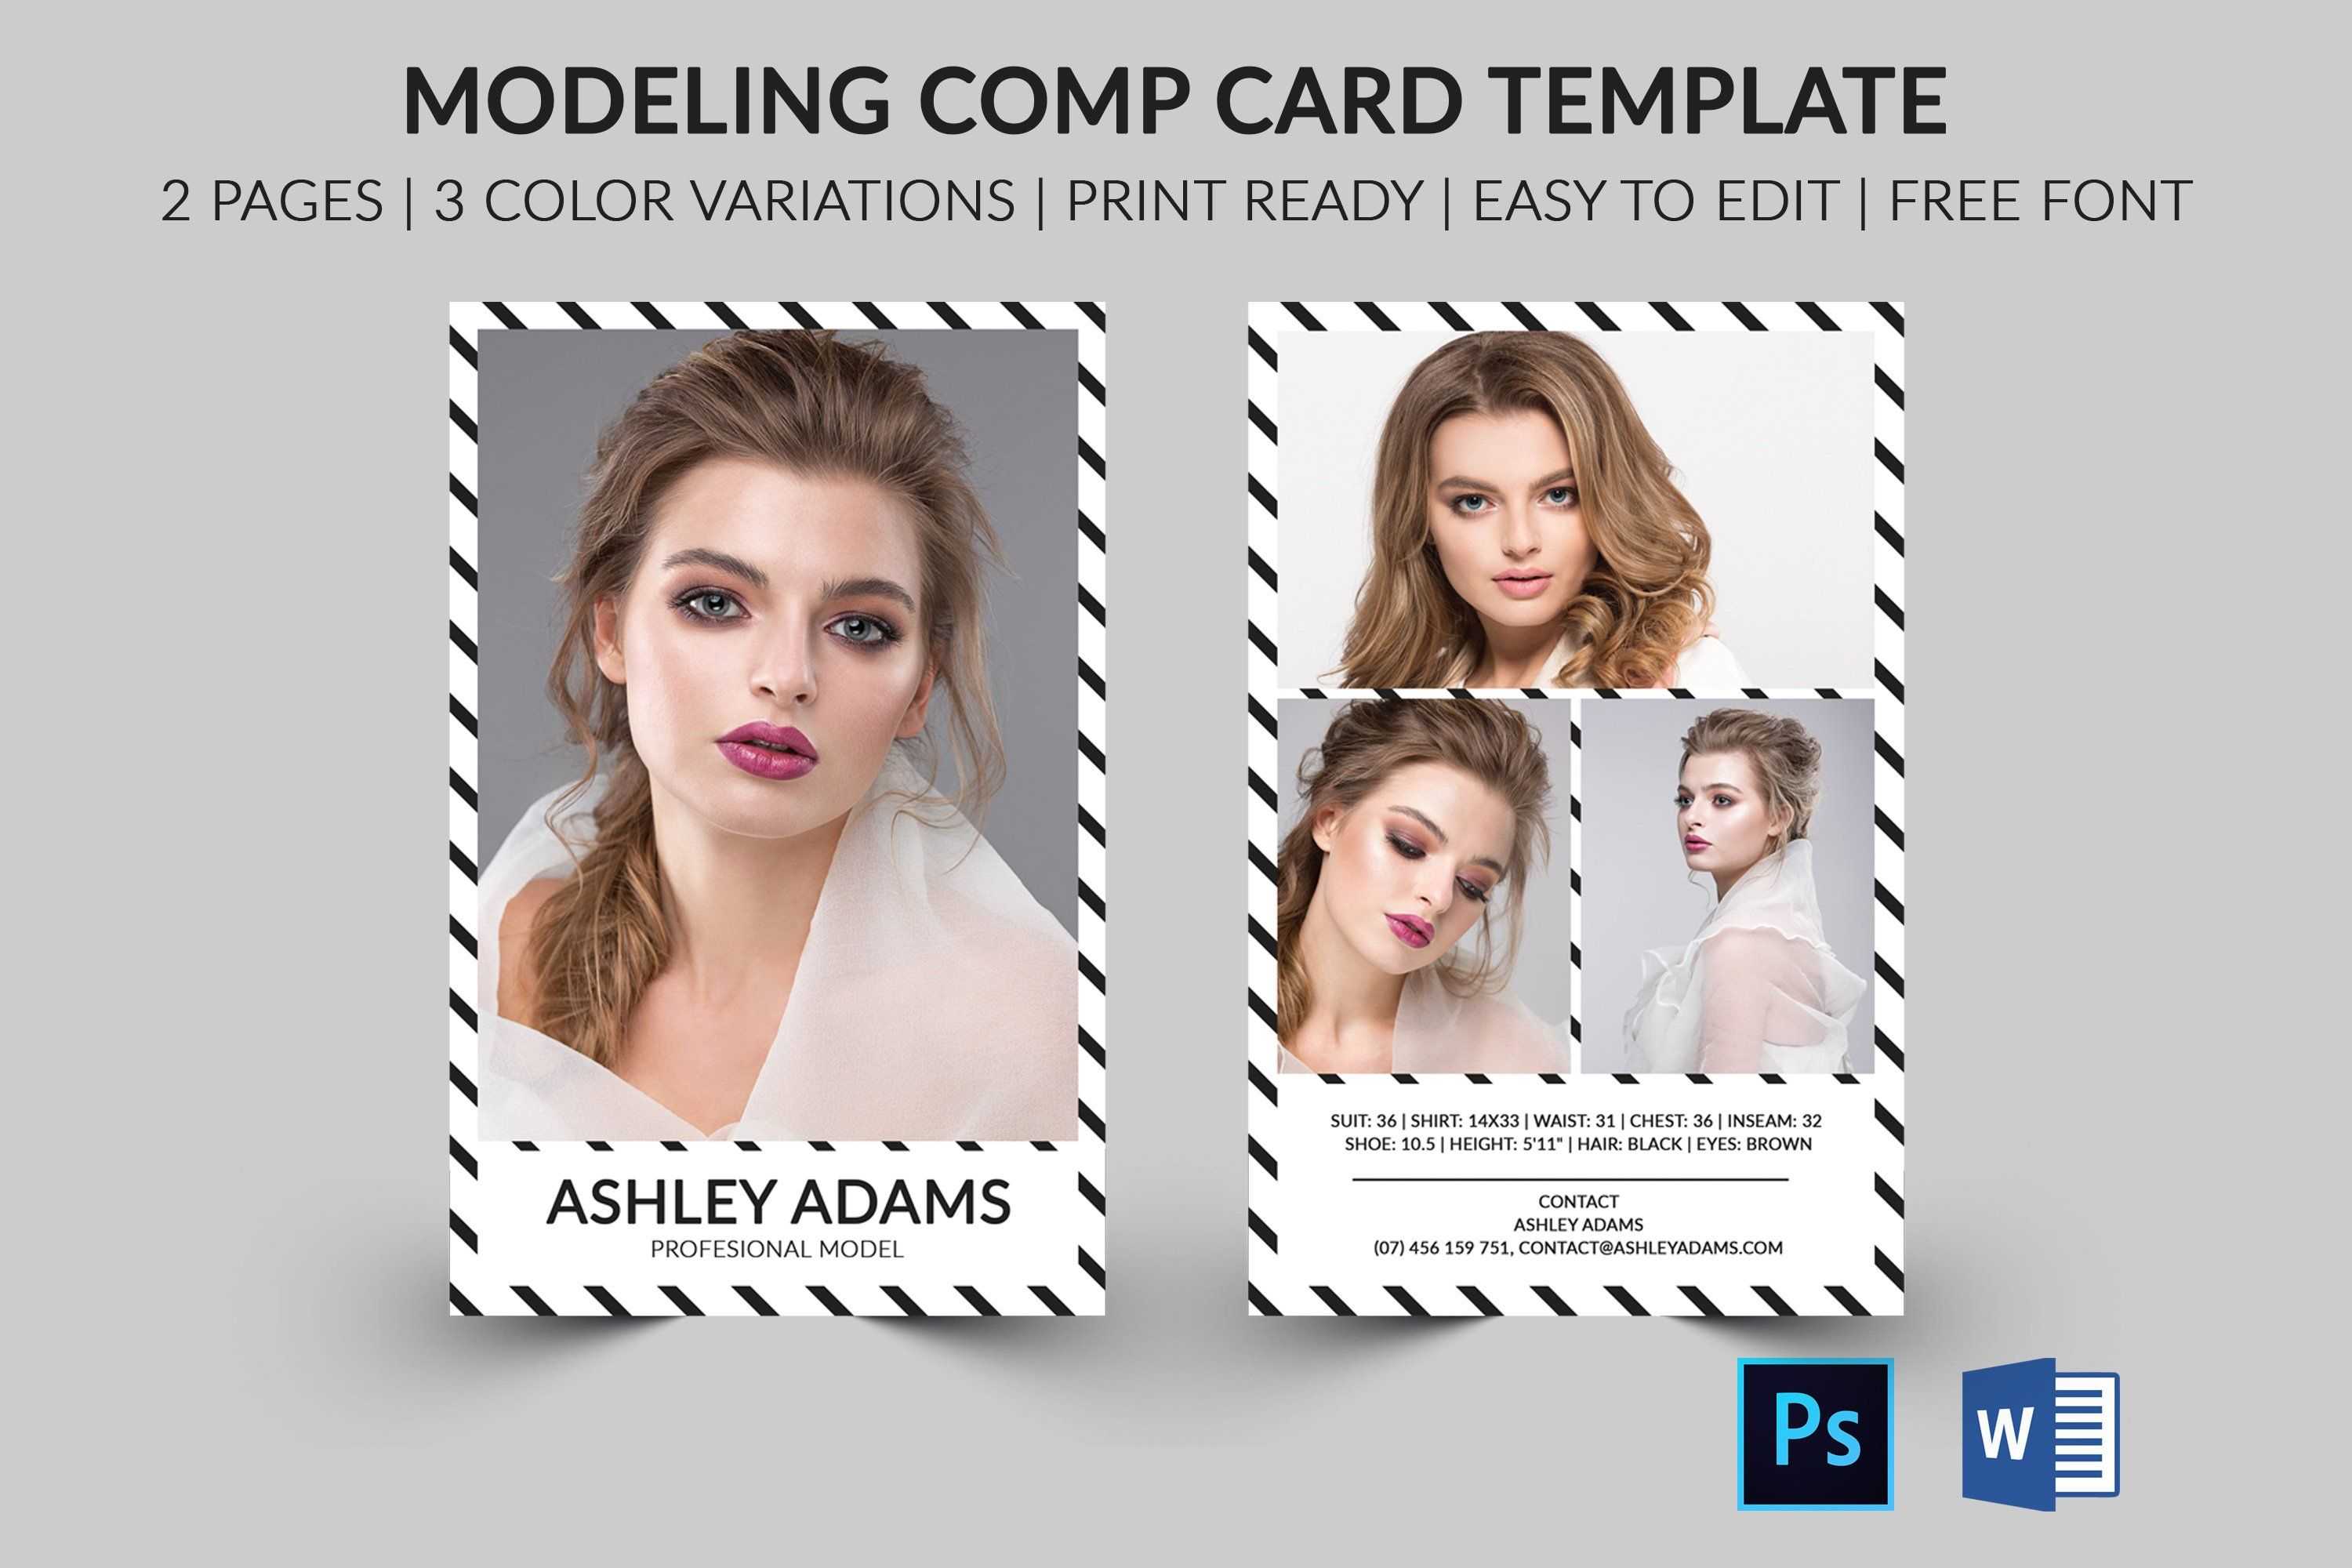 Modeling Comp Card | Model Agency Zed Card | Photoshop For Zed Card Template Free